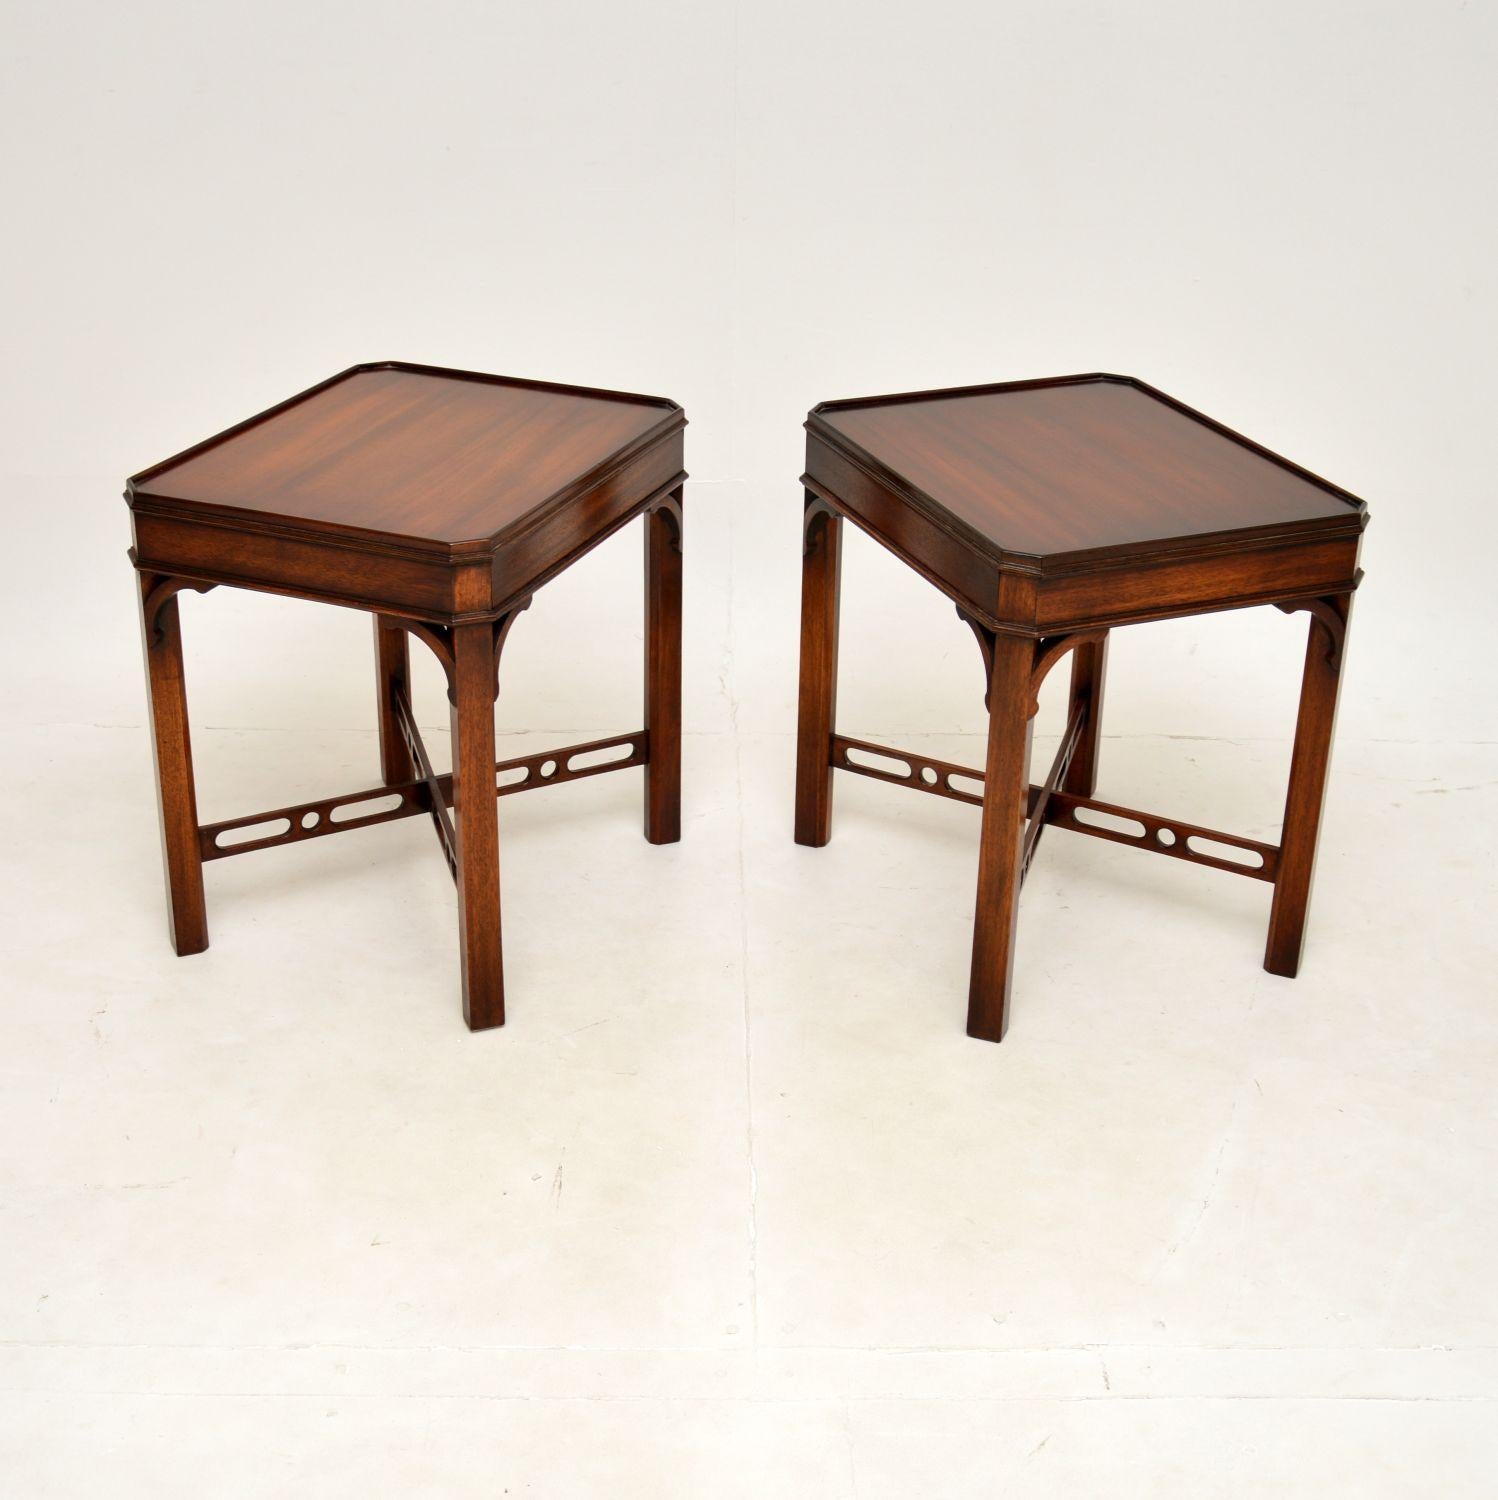 British Pair of Antique Chippendale Style Side Tables